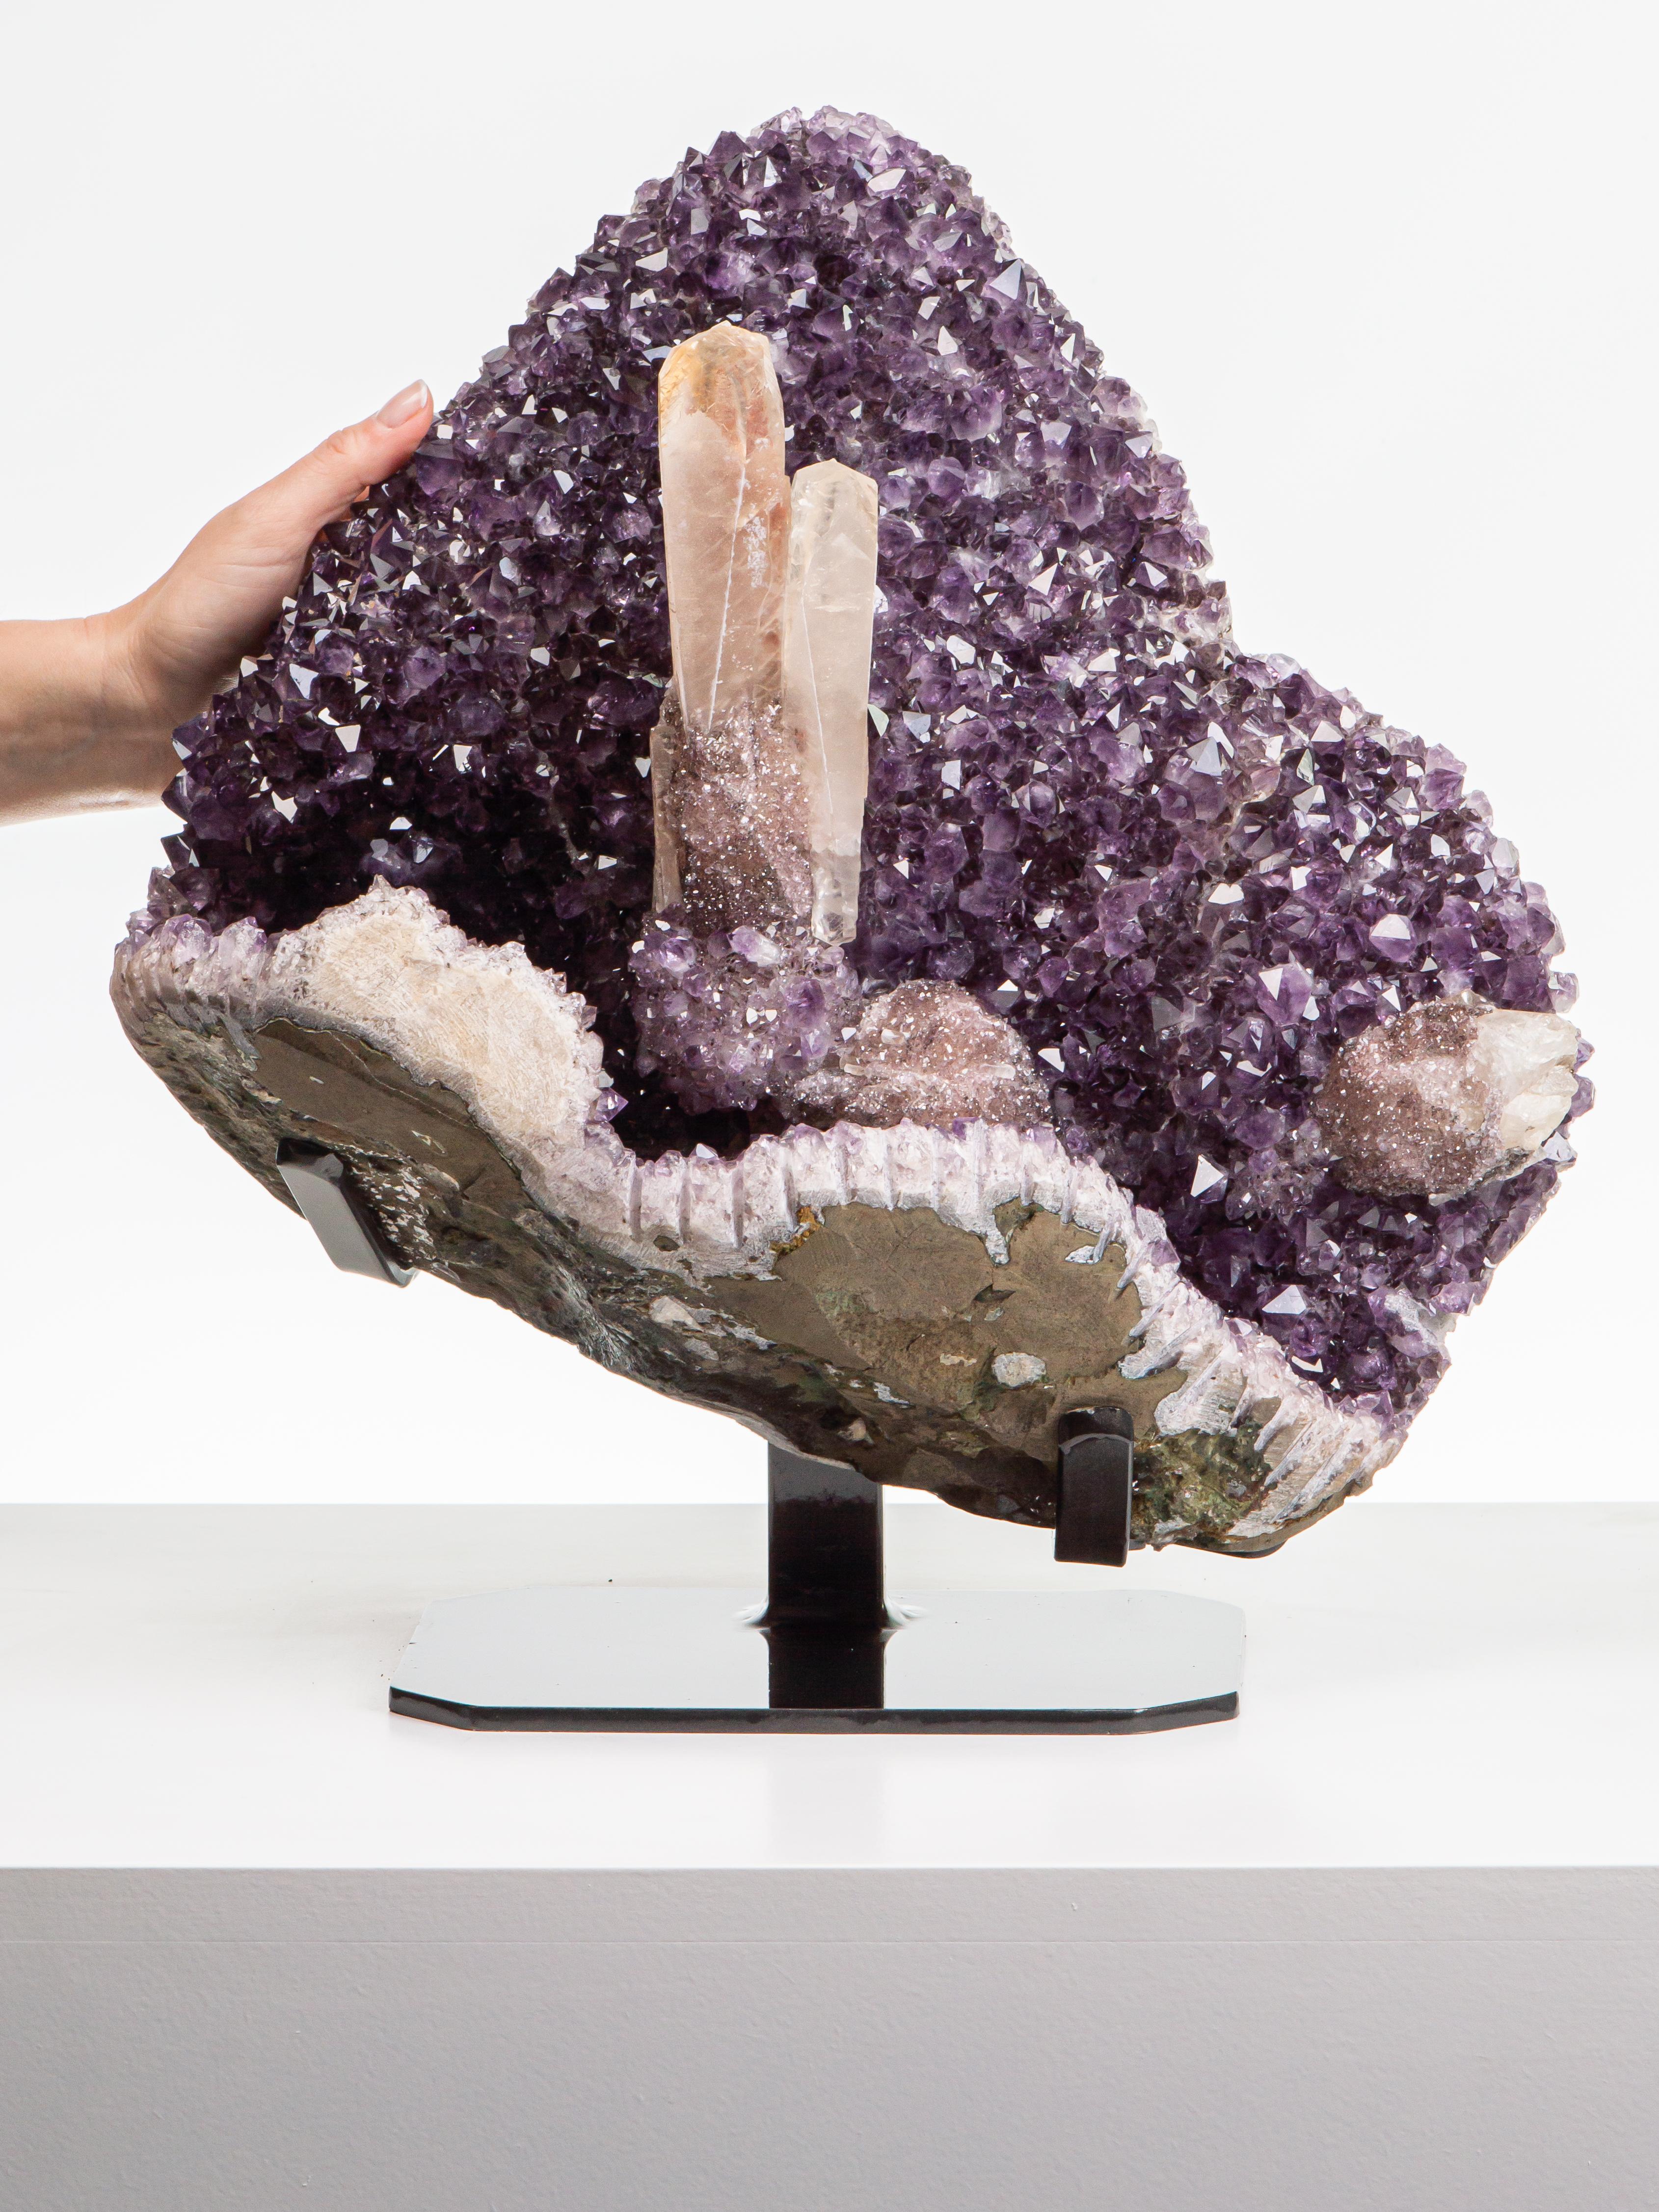 Two calcite “towers” grace the centre of this impressive piece, which also
has large peaked amethyst crystals and quartz and goethite covered calcites.
The exterior has been kept in its rough state, contrasting beautiuflly.
With the reflective